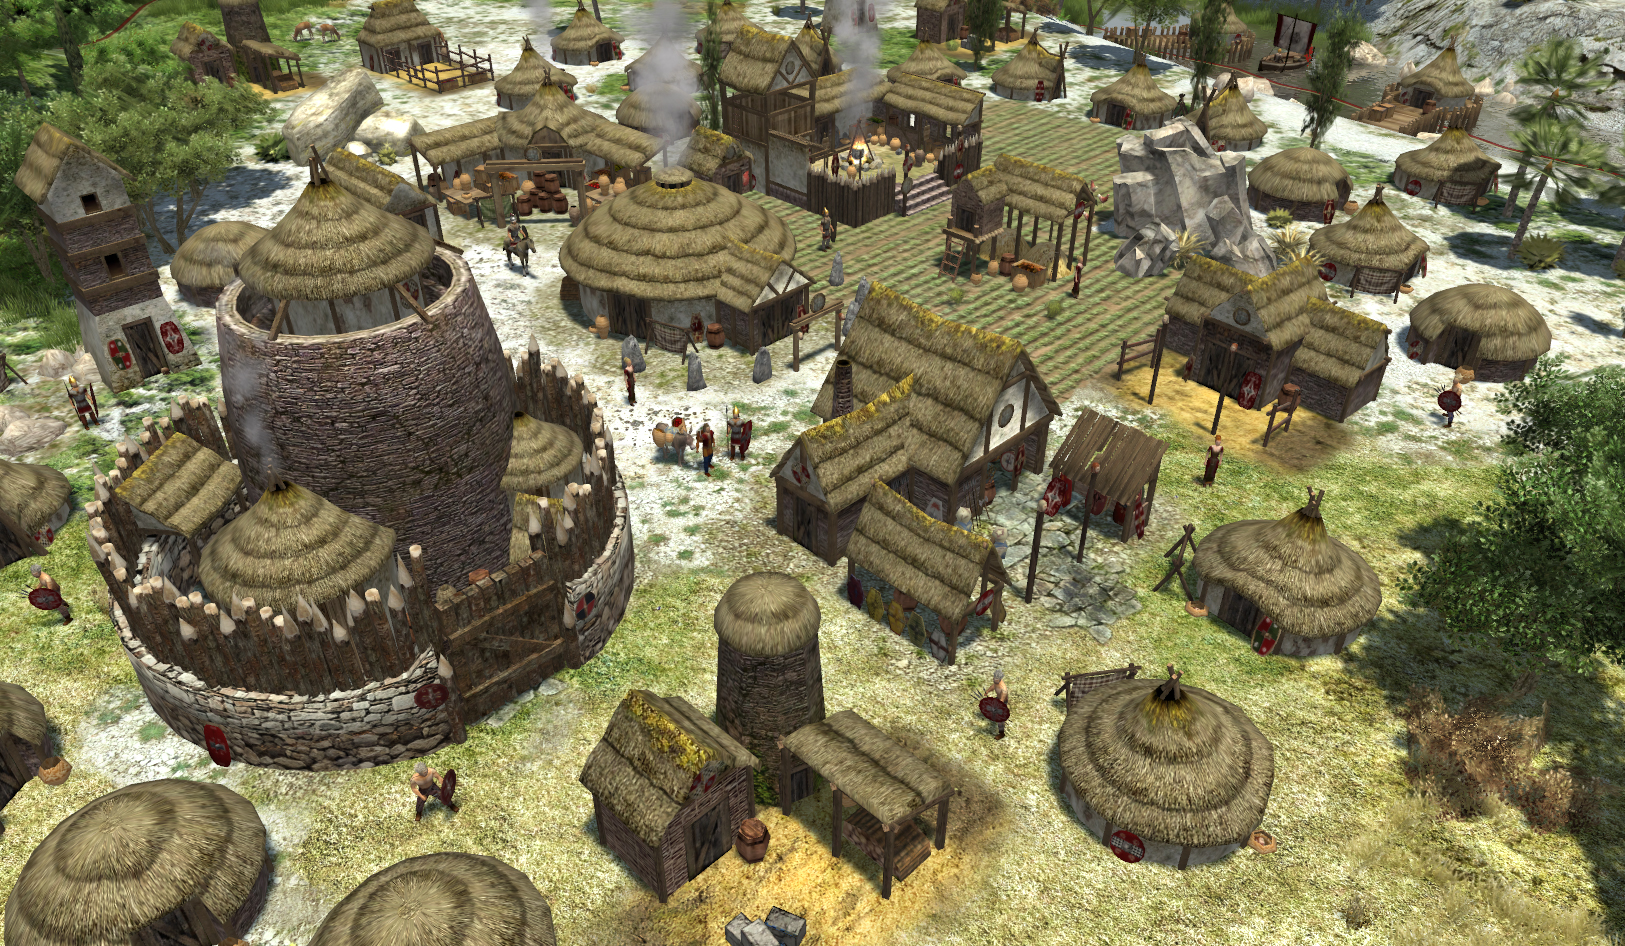 0 ad empires ascendant, brythonic town, image, screenshots, screens, pictur...